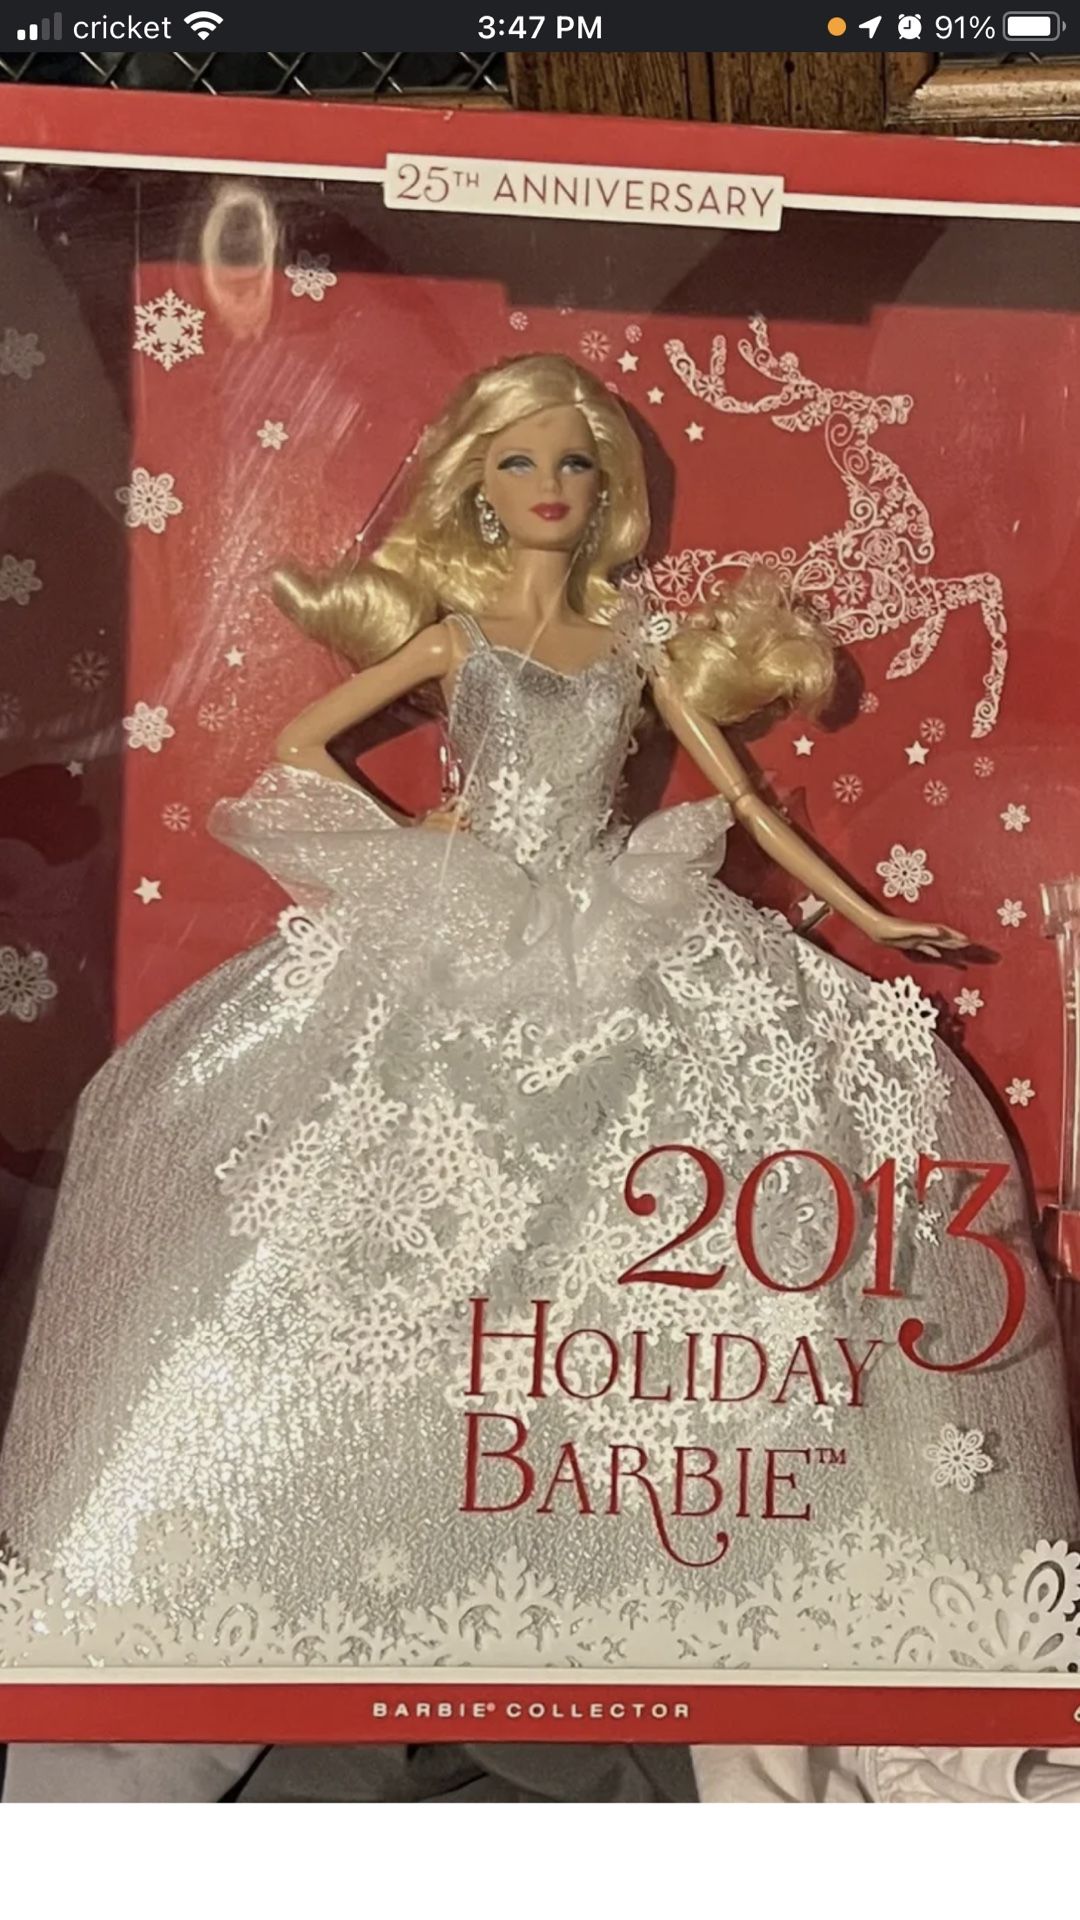 HOLIDAY BARBIE YEAR ( 2013 )